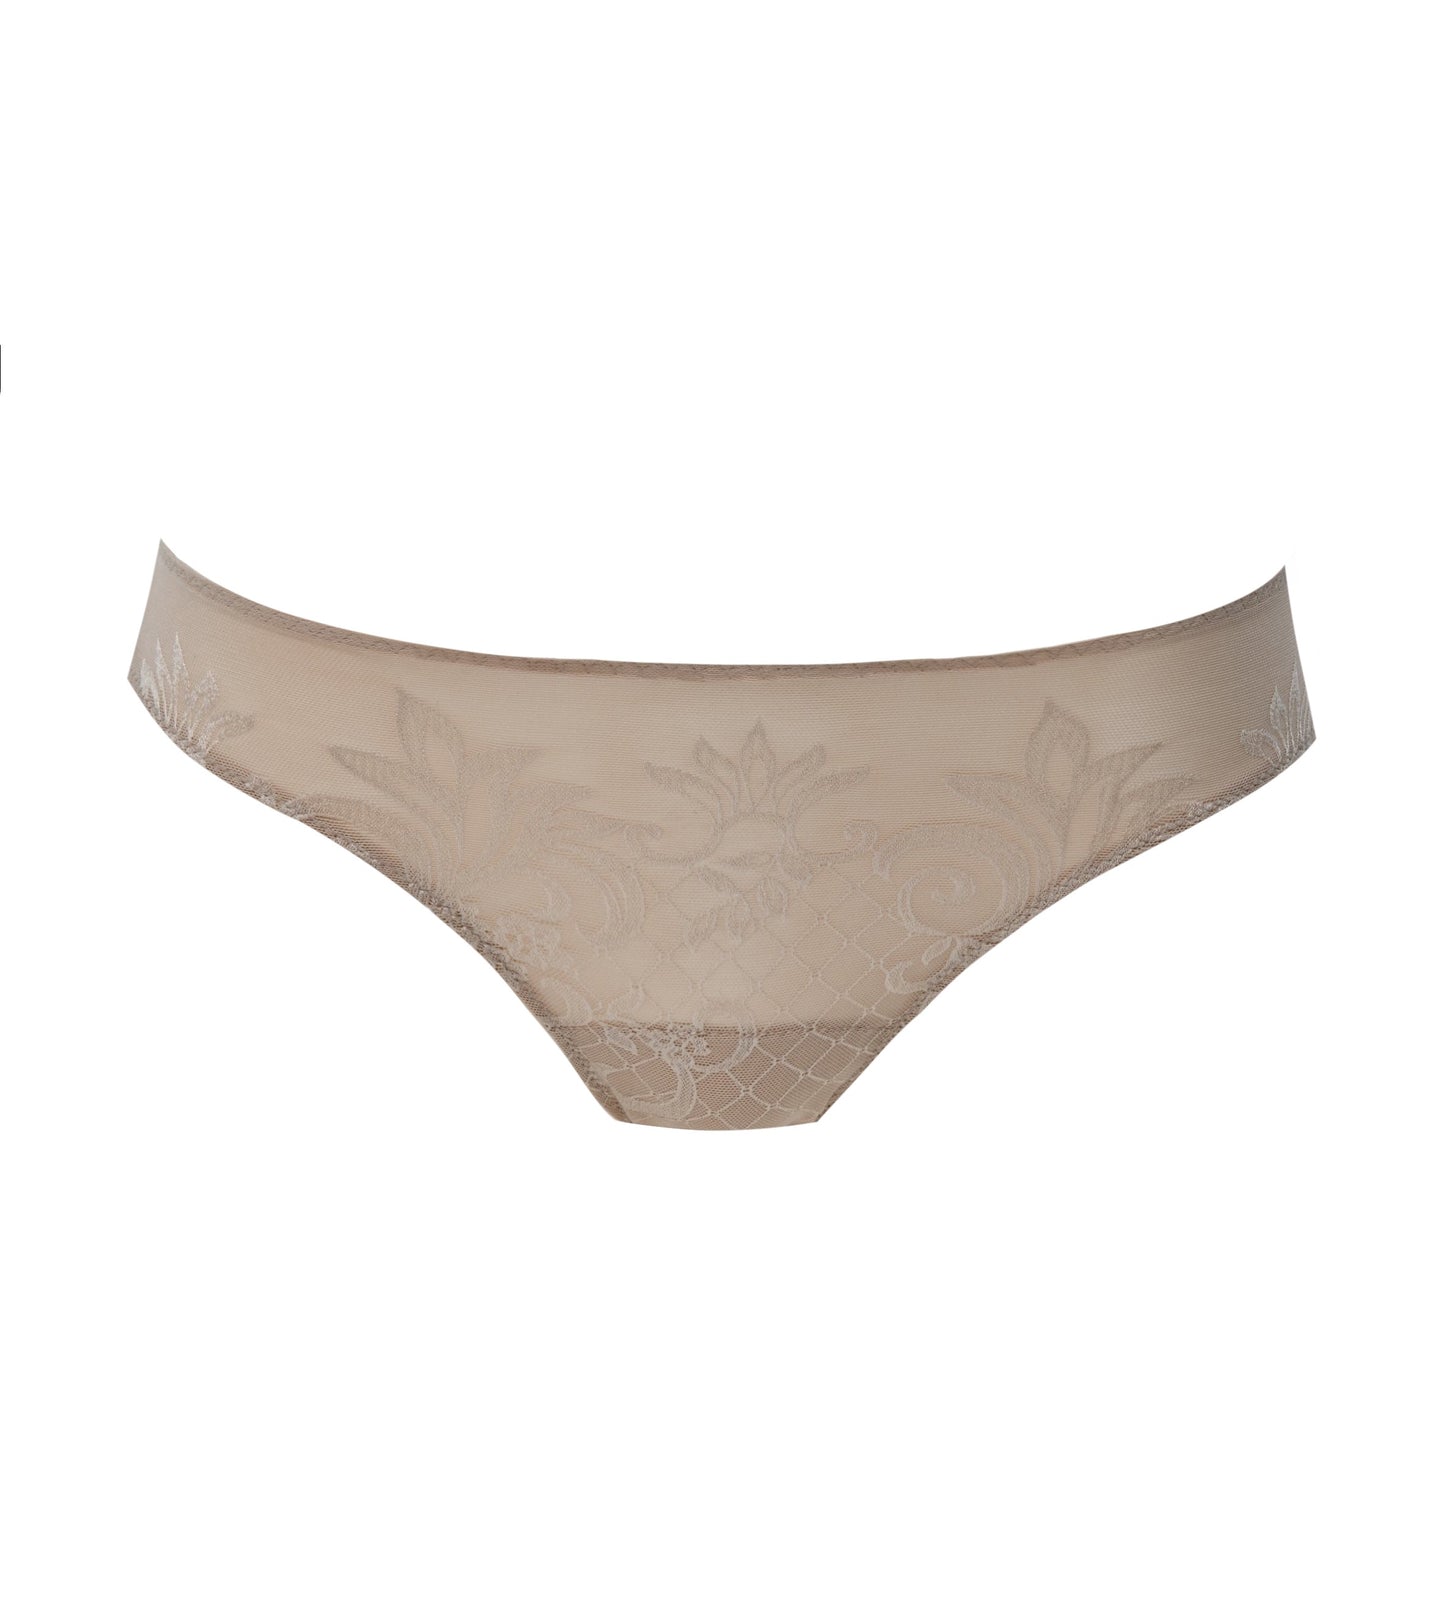 This Brazilian brief from the Free line by Italian brand Leilieve is exquisitely crafted from a delicate semi-sheer jacquard fabric featuring a harmonious blend of floral and geometric patterns. The ultra-thin and soft fabric is highly stretchy and offers superior comfort, making it perfect for all day wear.